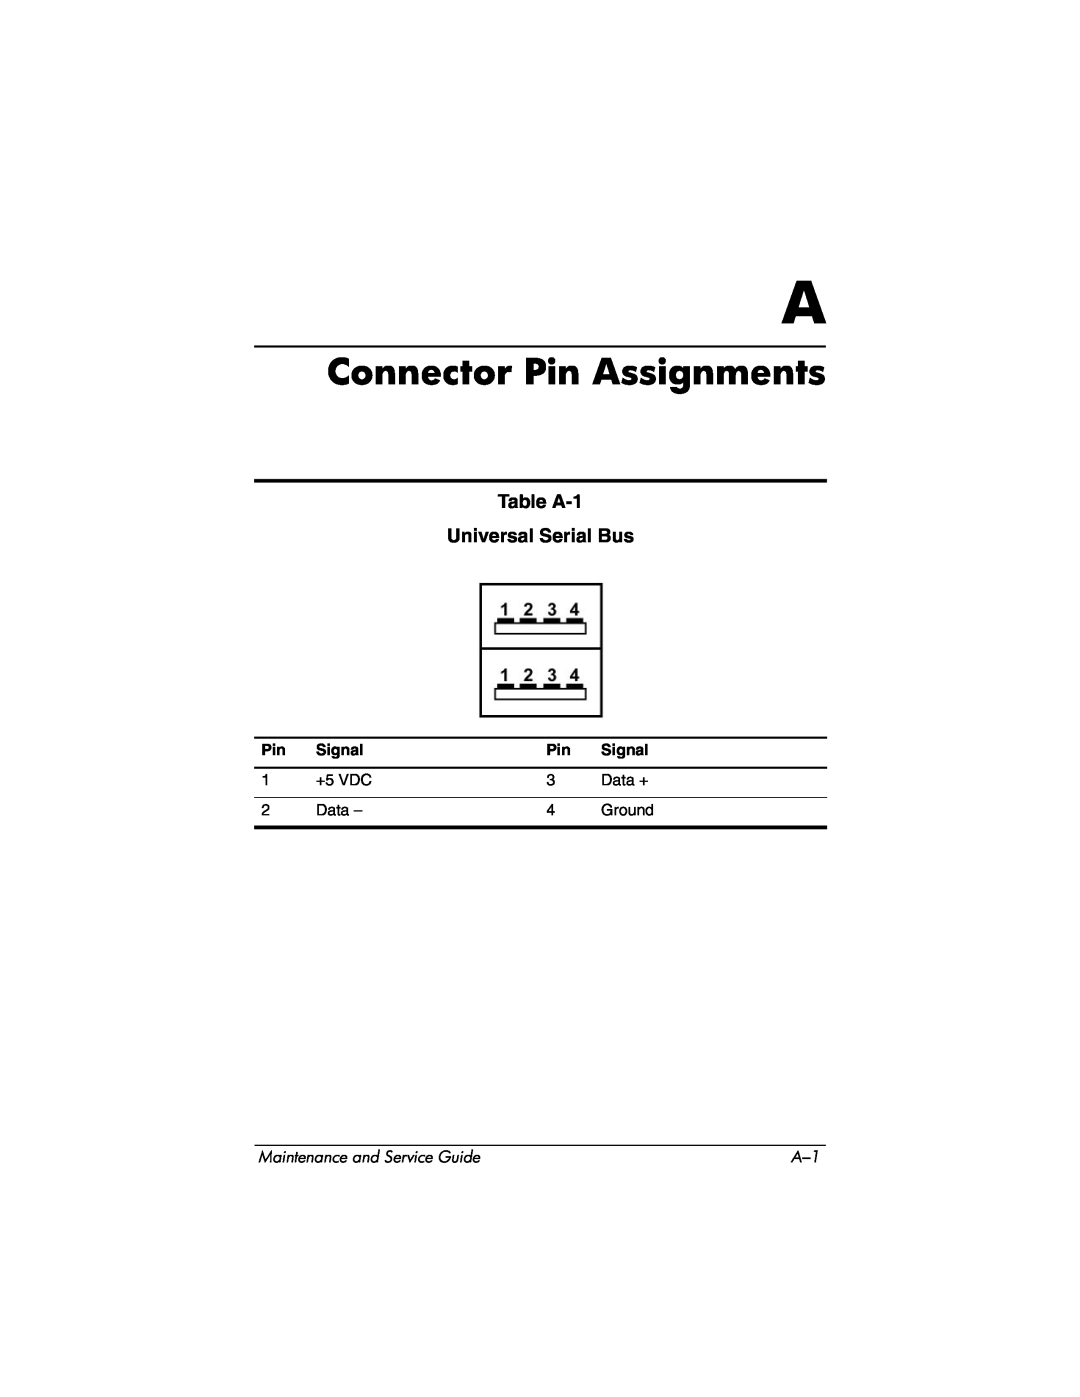 HP ZE4900, NX9040, NX9030 Connector Pin Assignments, Table A-1 Universal Serial Bus, Signal, Maintenance and Service Guide 